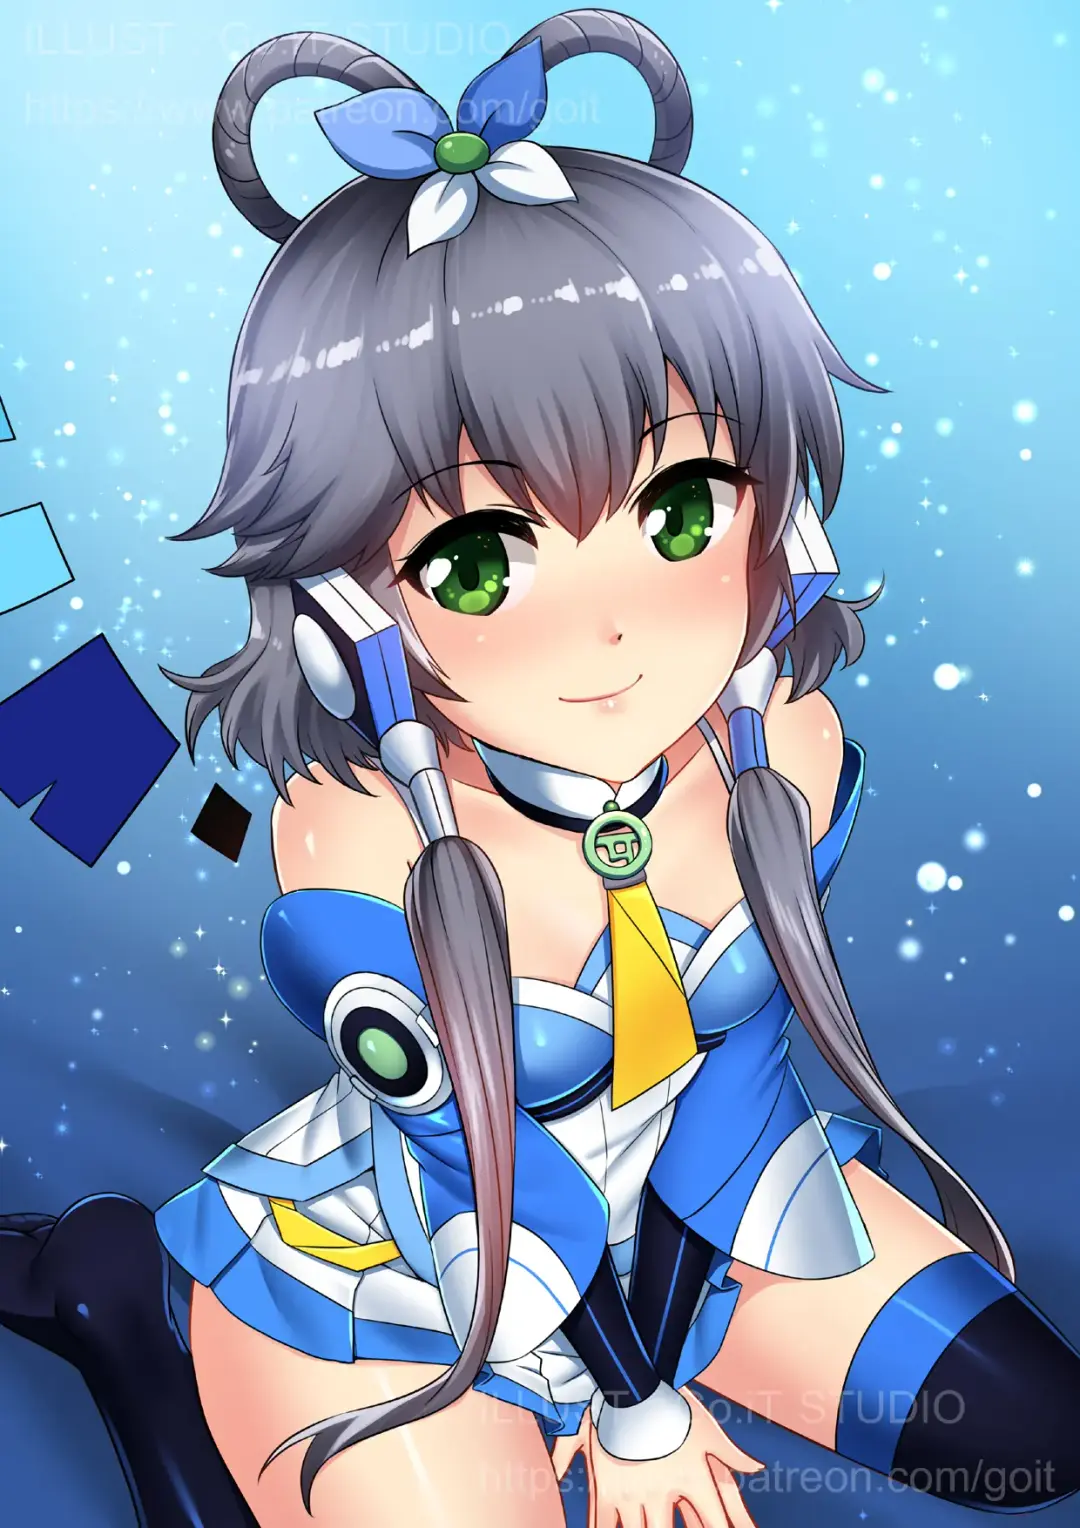 Read [Go-it] Luo Tianyi - Vocaloid - Fhentai.net